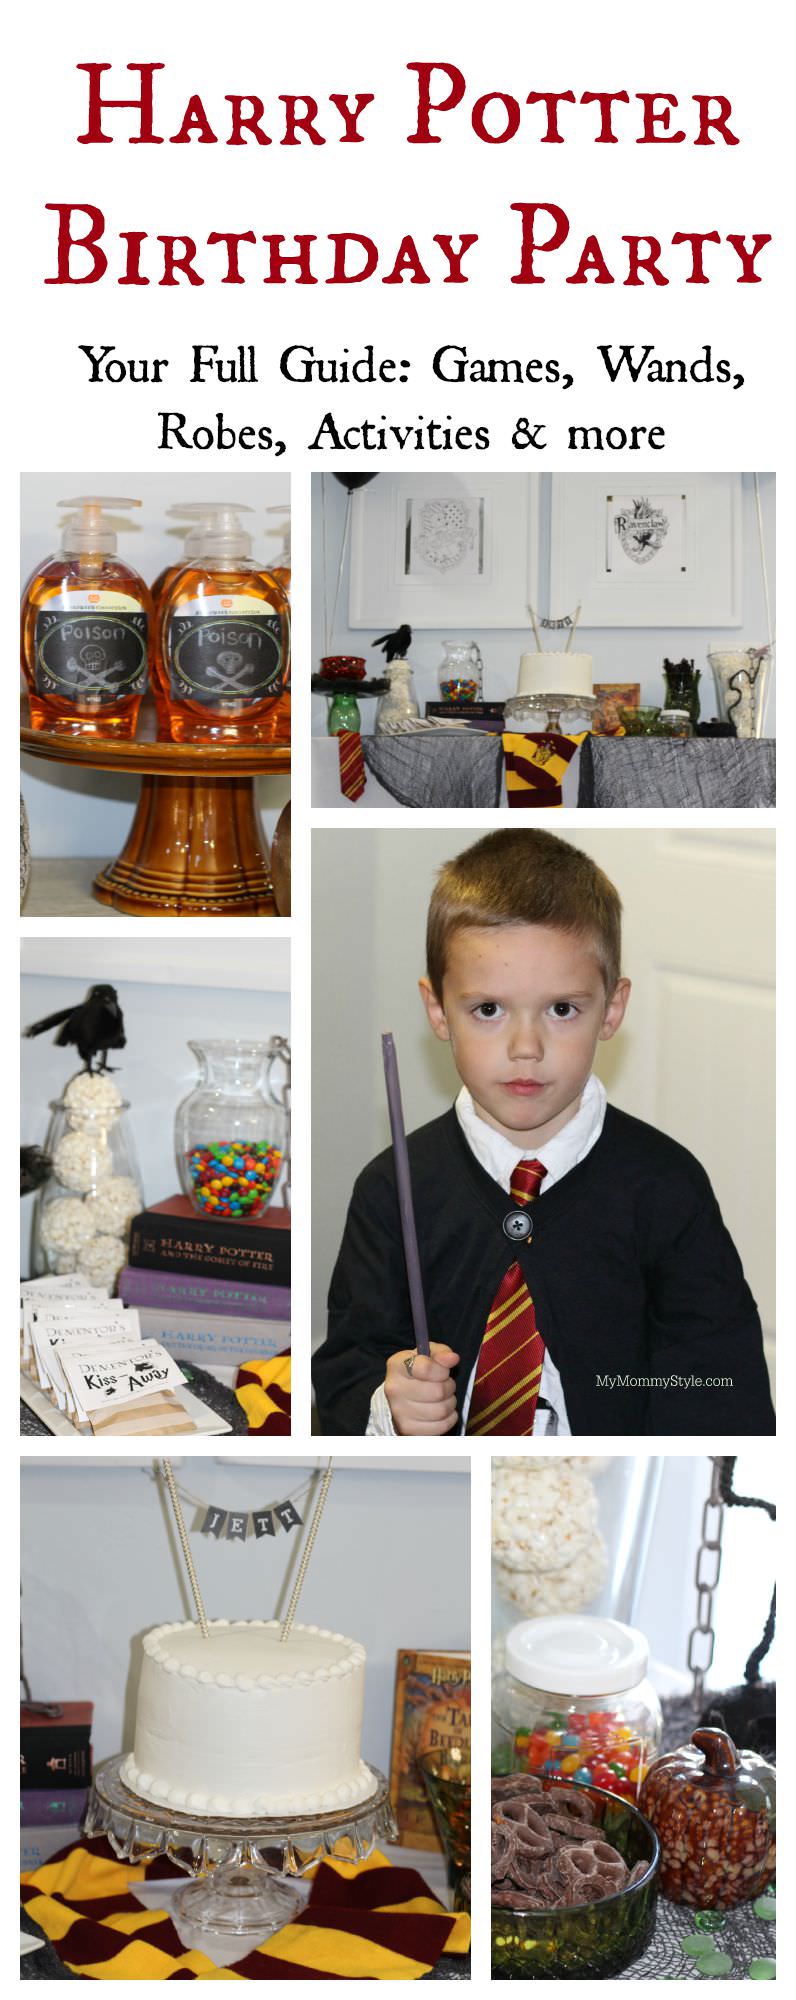 Harry Potter Vintage Children's Kids Personalized Birthday Party